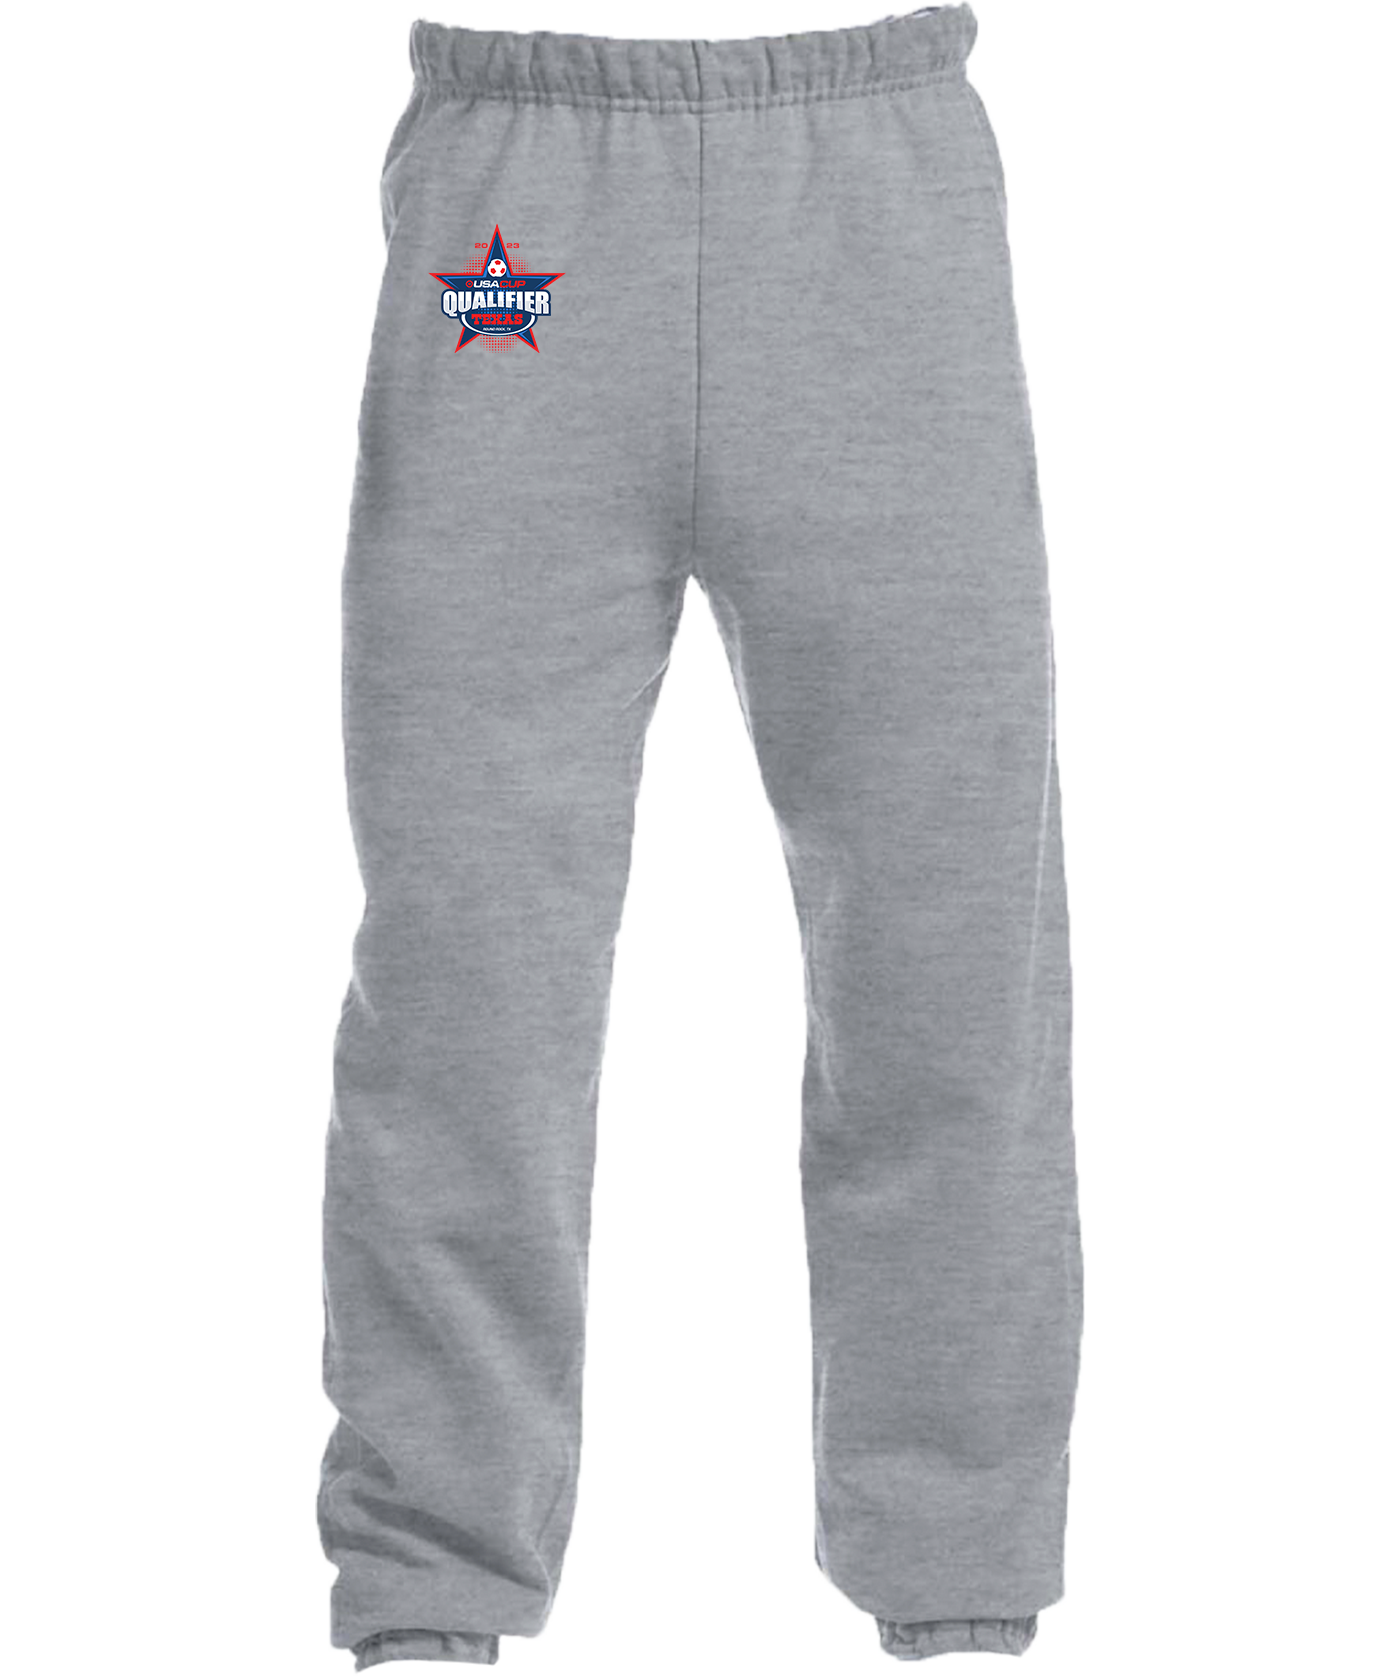 SWEAT PANTS - 2023 USA CUP Qualifier Texas